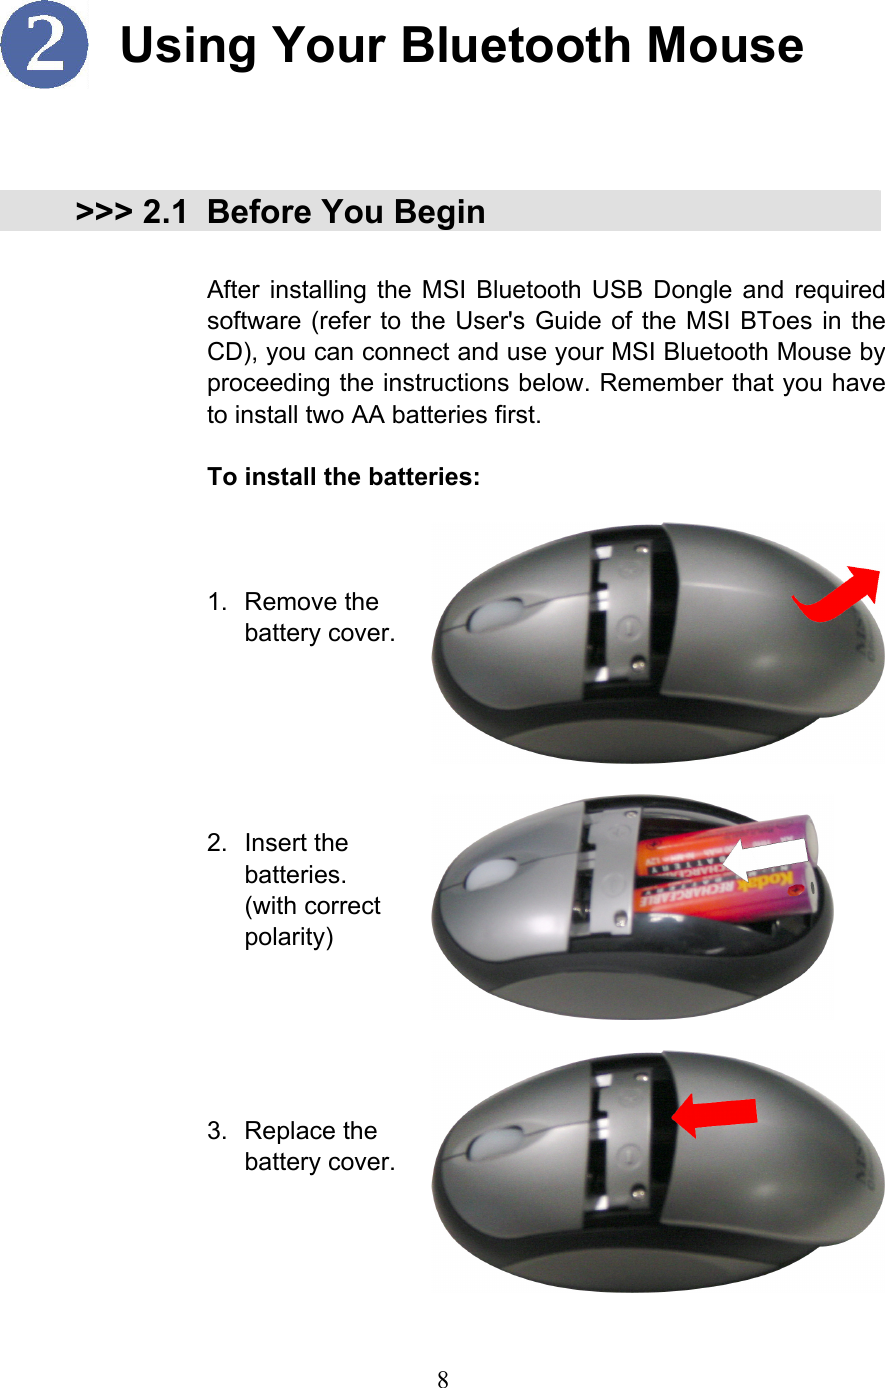  8  Using Your Bluetooth Mouse   &gt;&gt;&gt; 2.1 Before You Begin  After installing the MSI Bluetooth USB Dongle and required software (refer to the User&apos;s Guide of the MSI BToes in the CD), you can connect and use your MSI Bluetooth Mouse by proceeding the instructions below. Remember that you have to install two AA batteries first.  To install the batteries:    1. Remove the battery cover.   2. Insert the batteries. (with correct polarity)     3. Replace the battery cover.